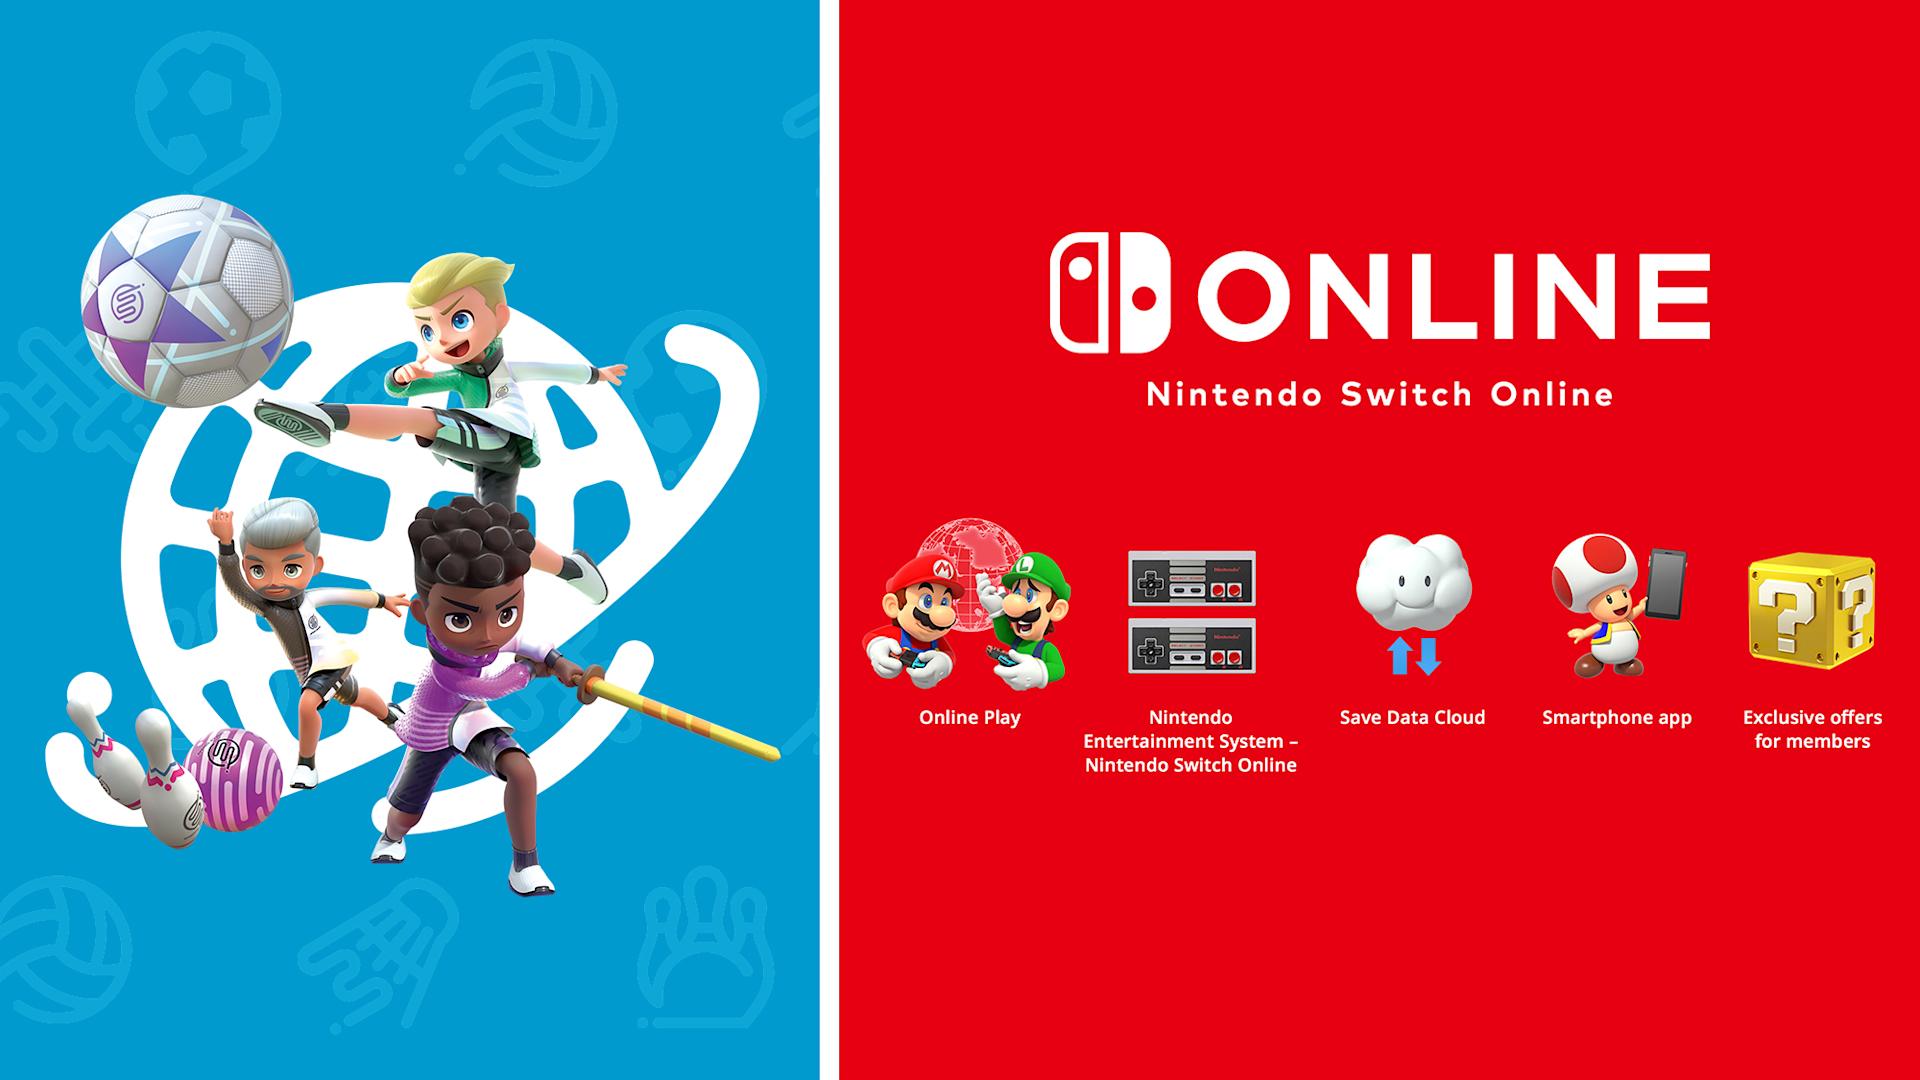 Play online multiplayer with Nintendo Switch Online Membership